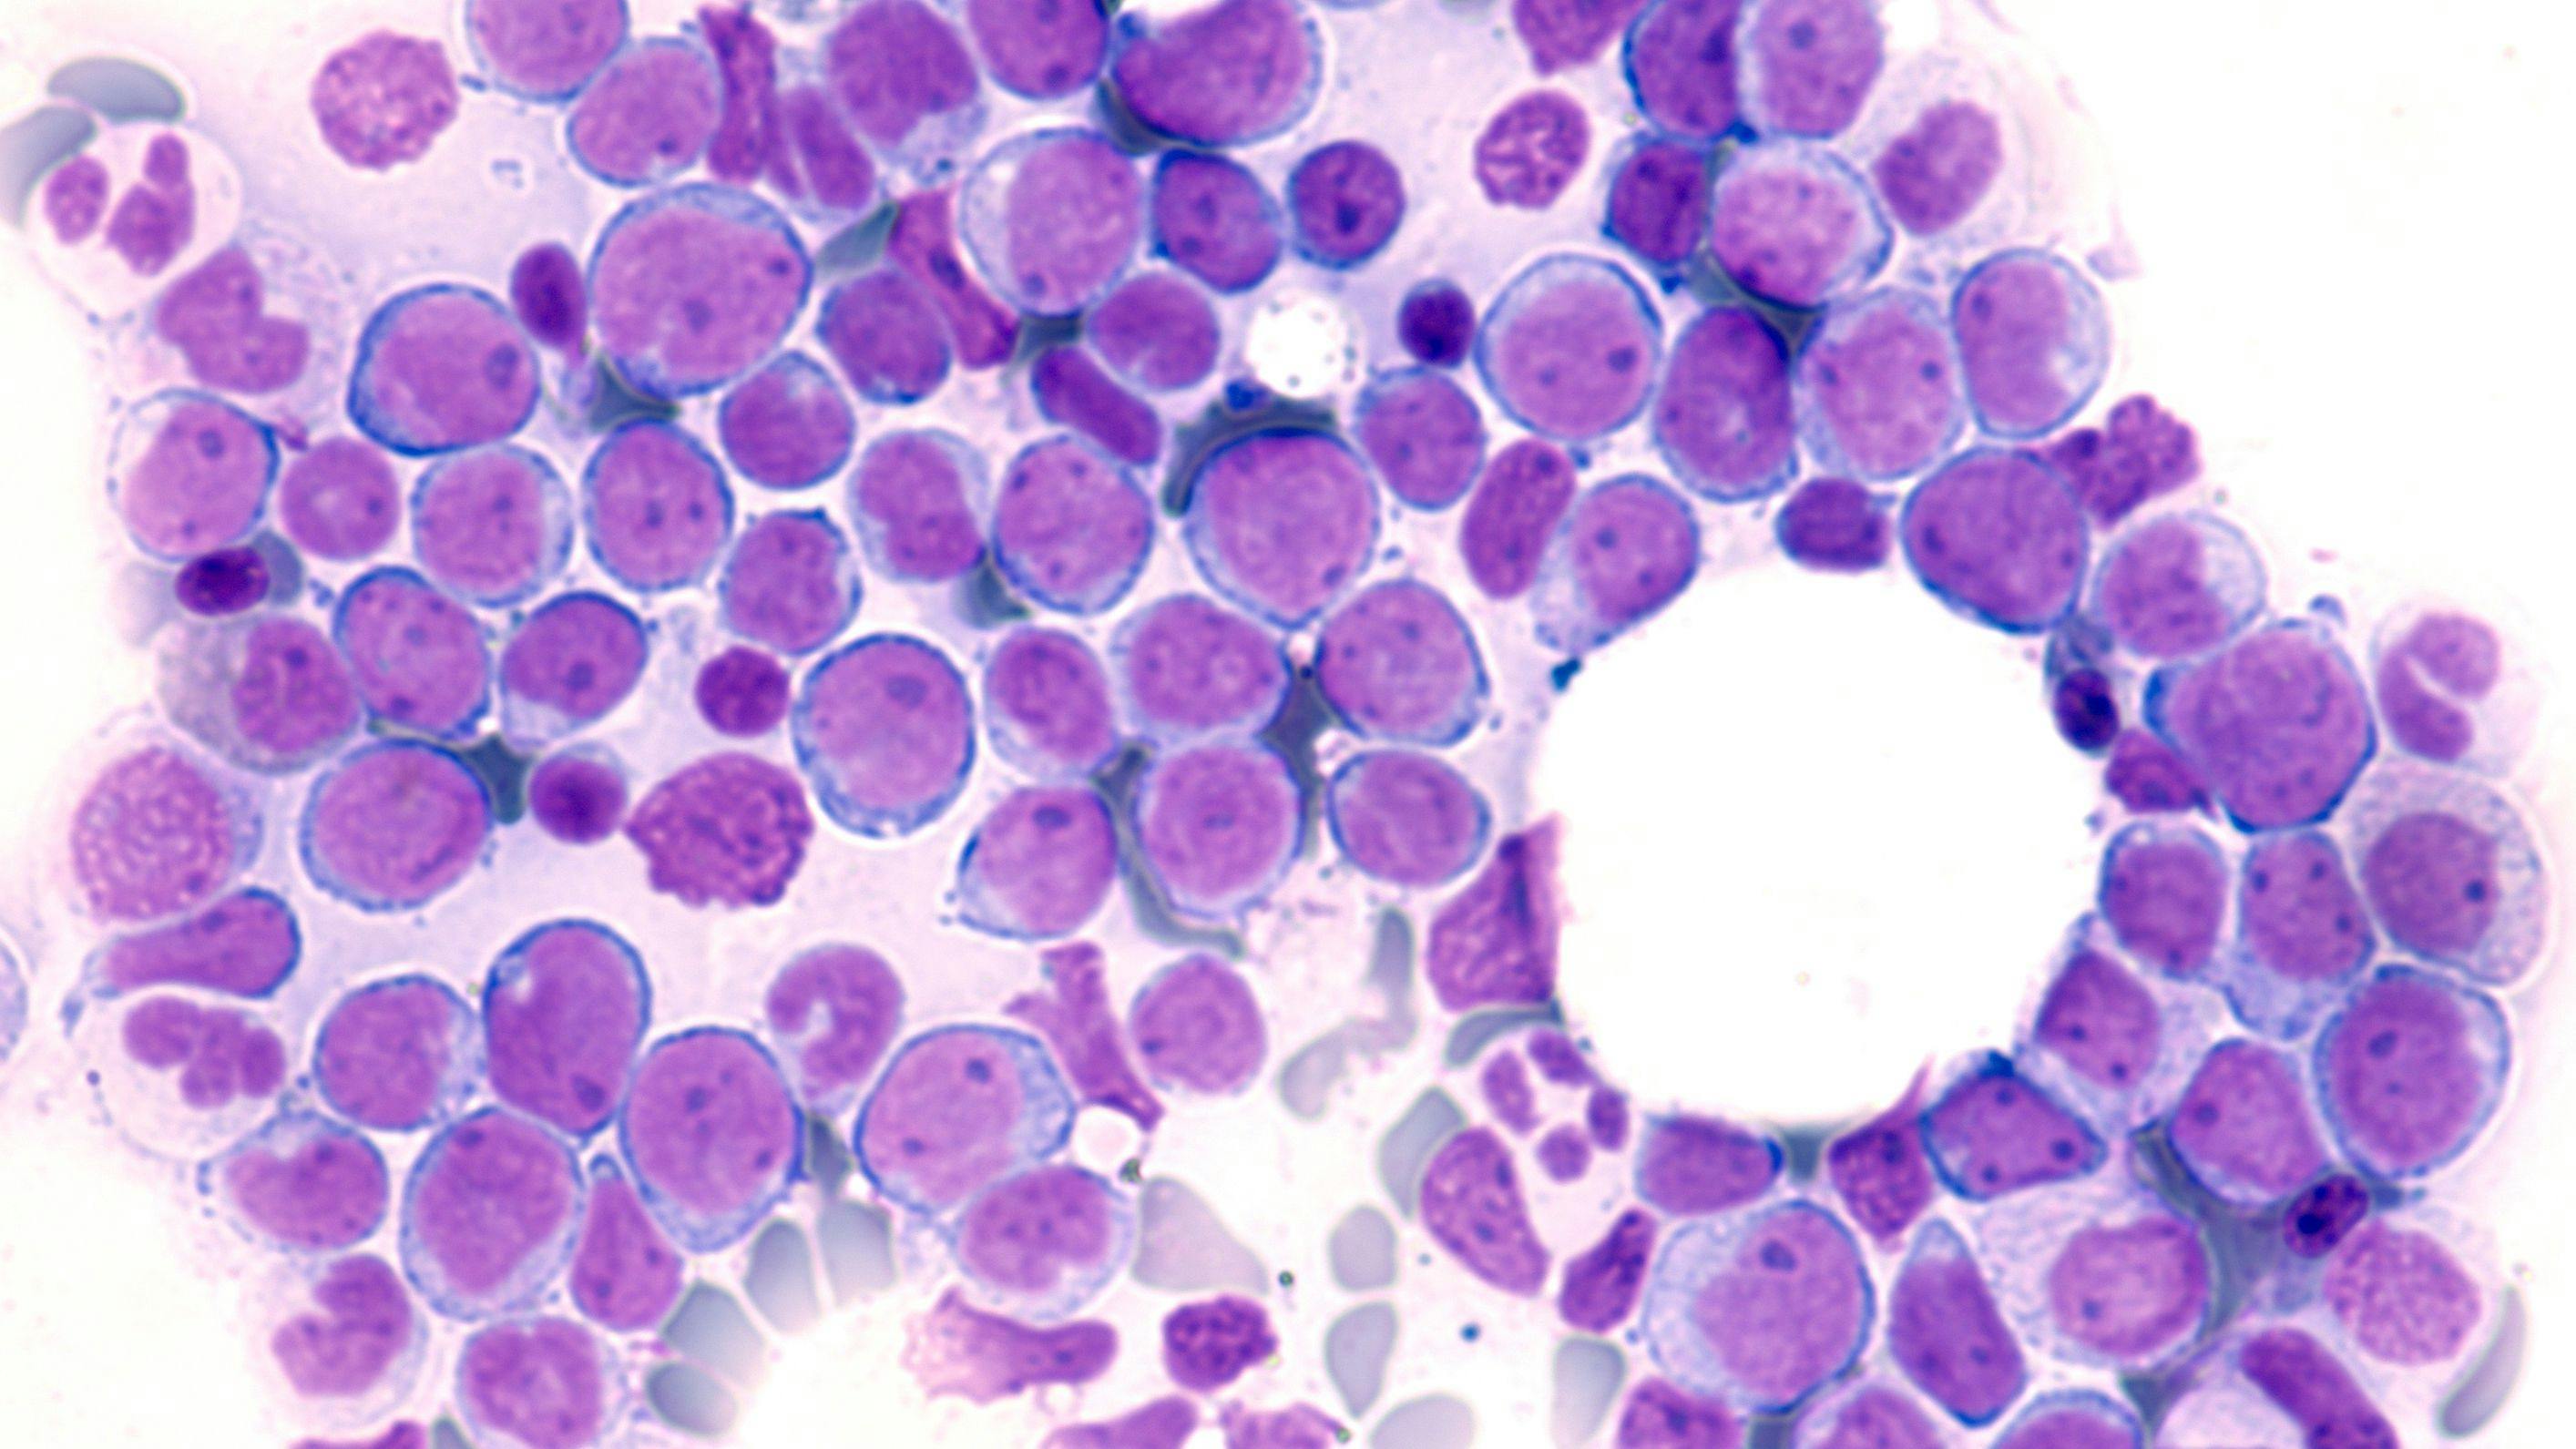 New Collaboration to Assess Stem Cell Therapy With Bispecific Antibody in AML